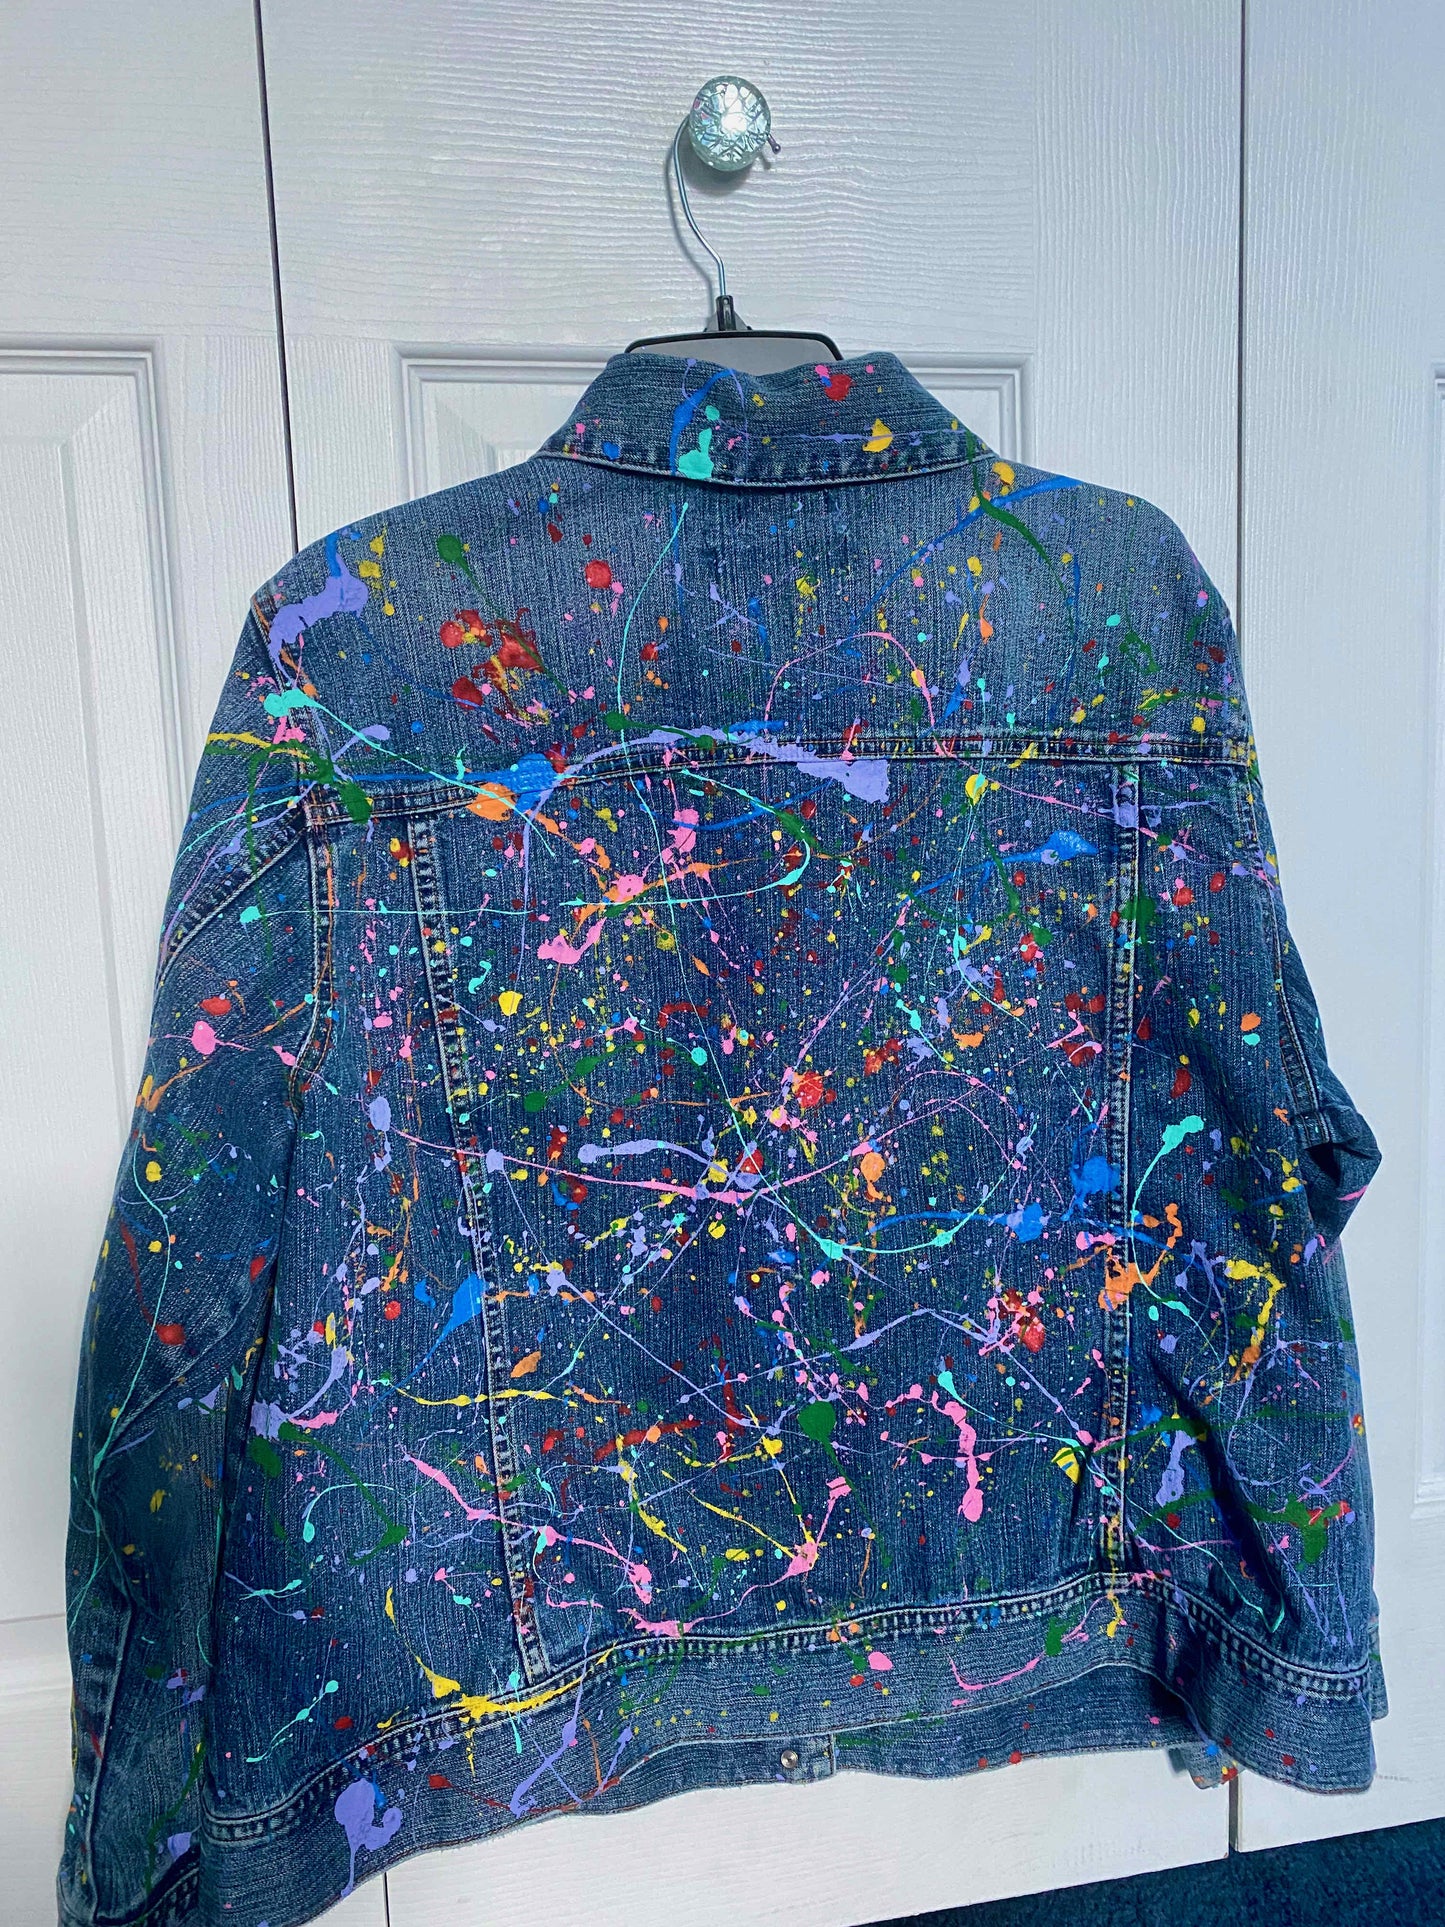 This is a one of kind custom splatter paint denim jacket that is meant to make a statement. This jacket was hand painted and carefully designed. 